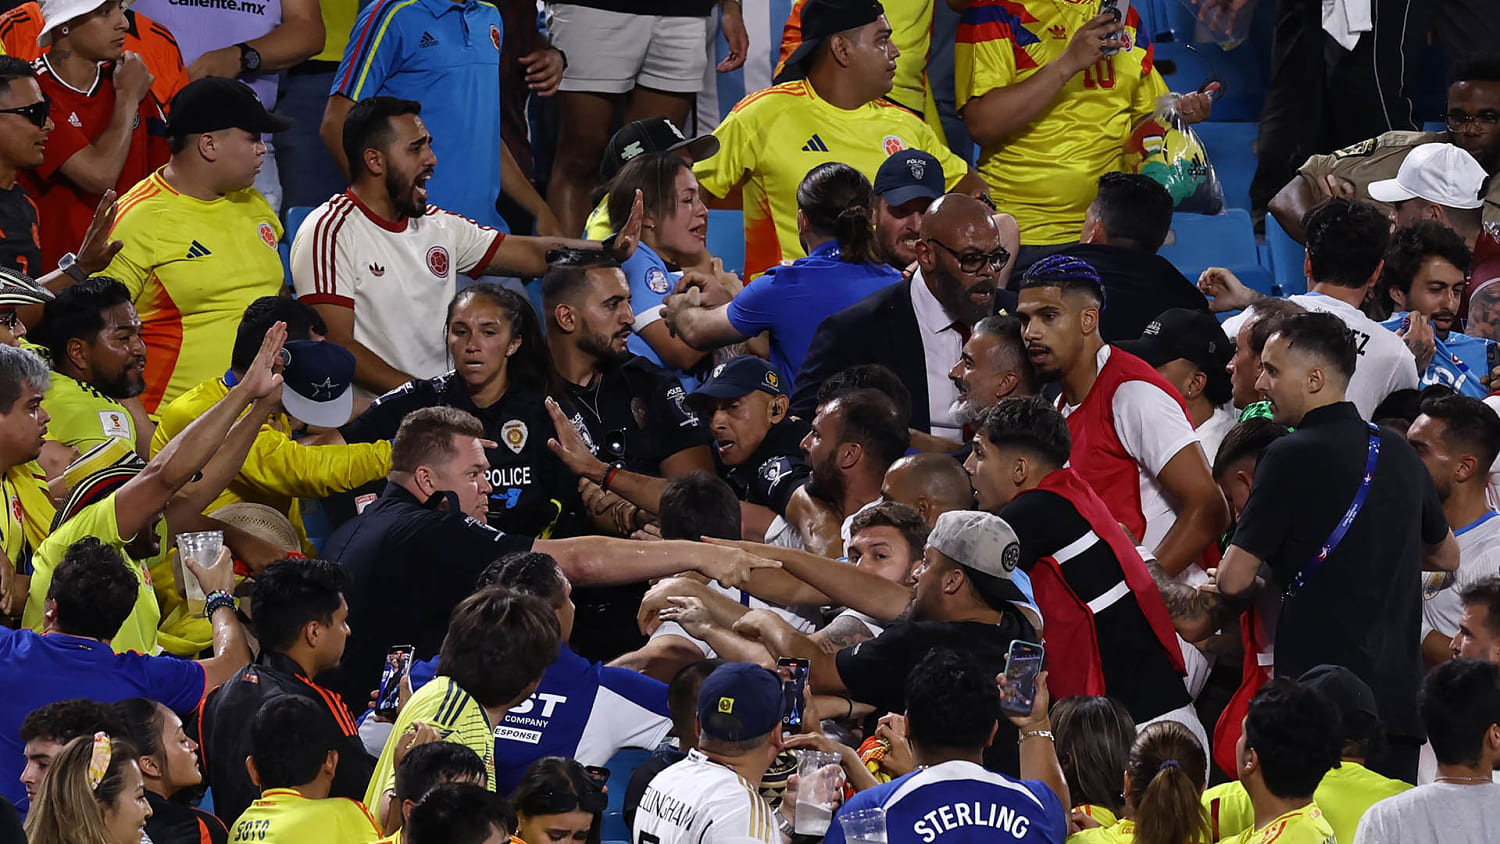 Video shows Uruguayan soccer stars brawl with Colombia fans at Copa America semifinal